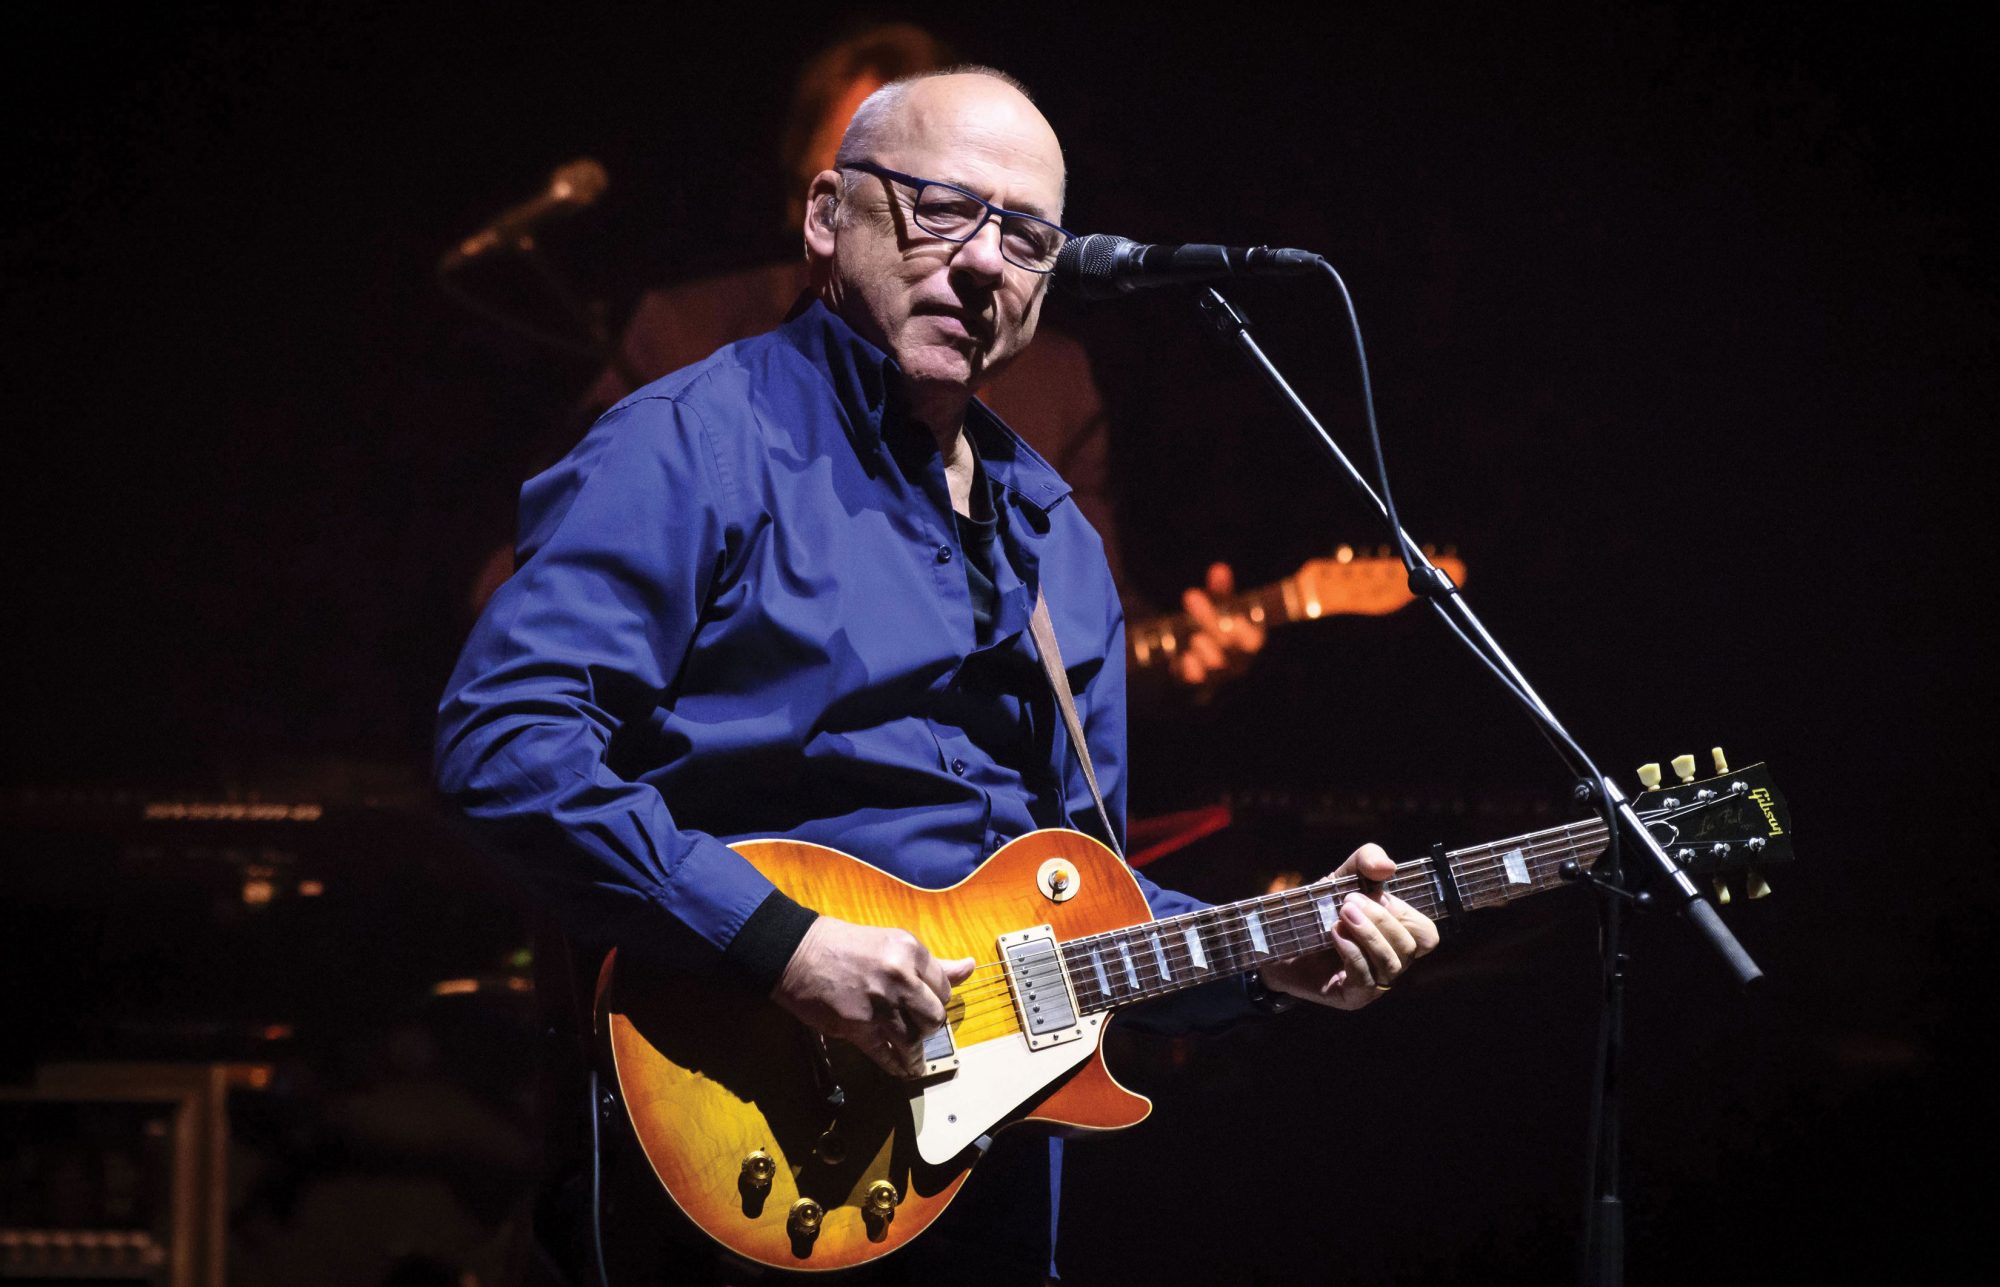 Mark Knopfler OBE
The master of evocative guitar and co-founder of Dire Straits graduated in English in 1973 and received an Honorary Doctor of Music in 1995.
Photo credit: © Angel Marchini/ZUMA Wire
 
